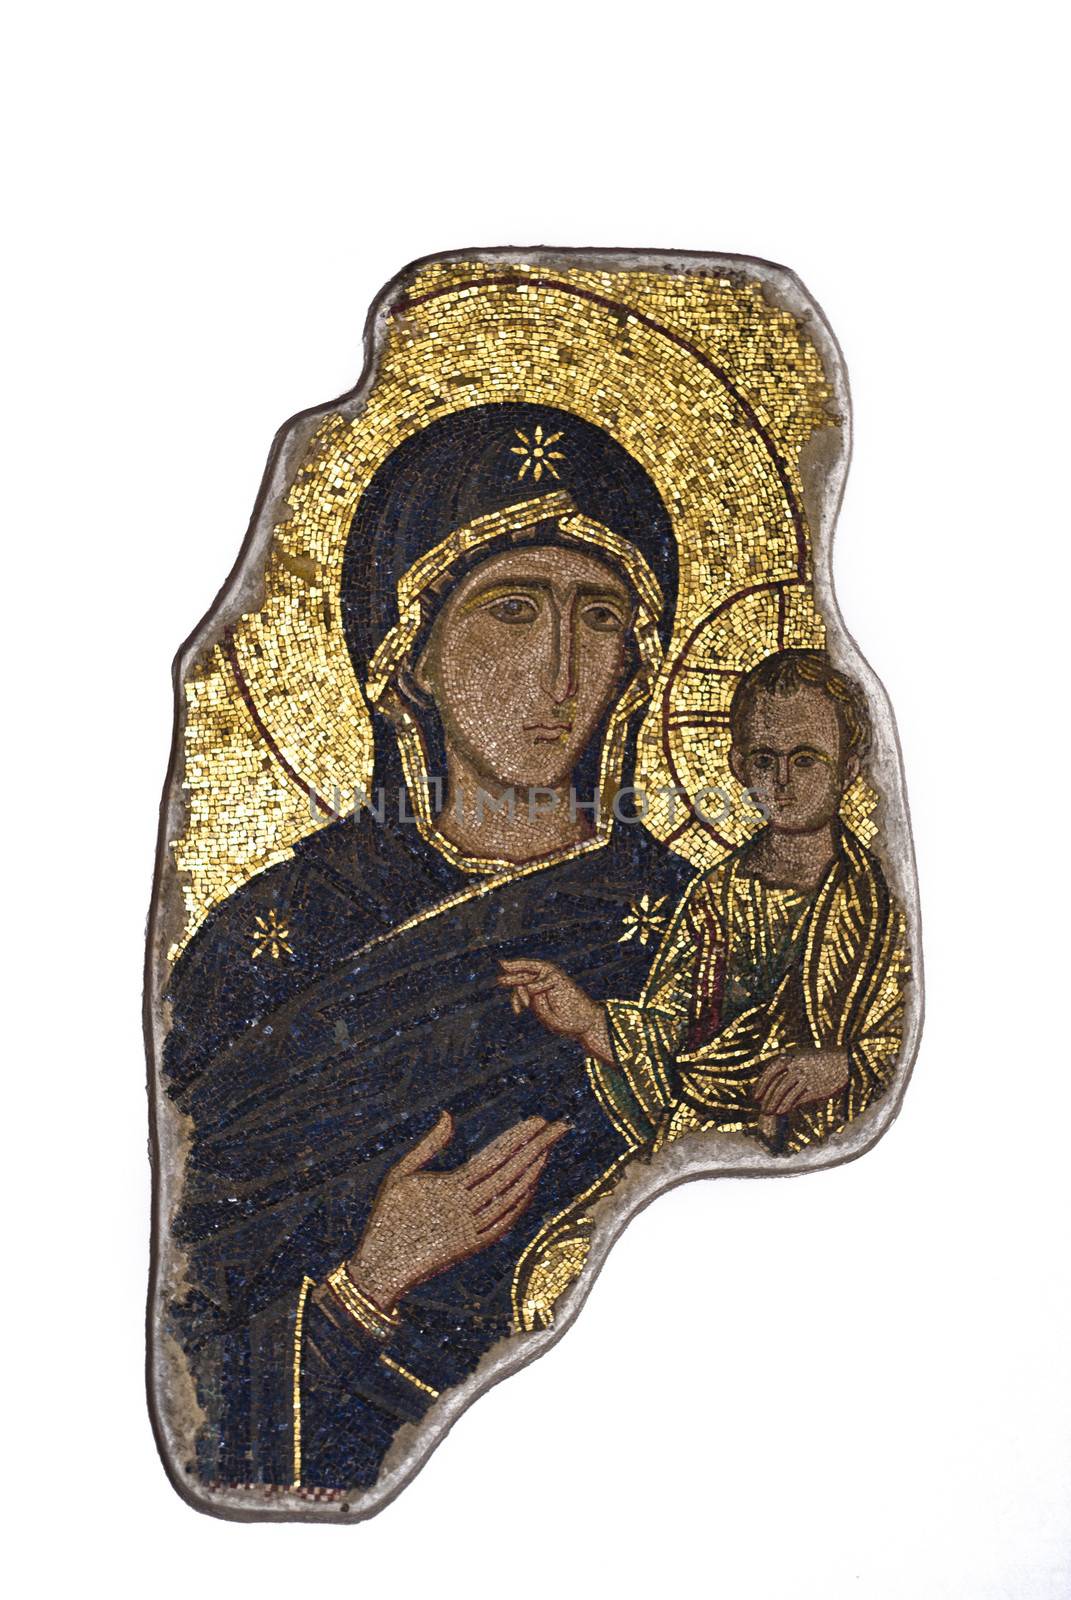 Fragment in the mosaic of the Madonna with child by gandolfocannatella